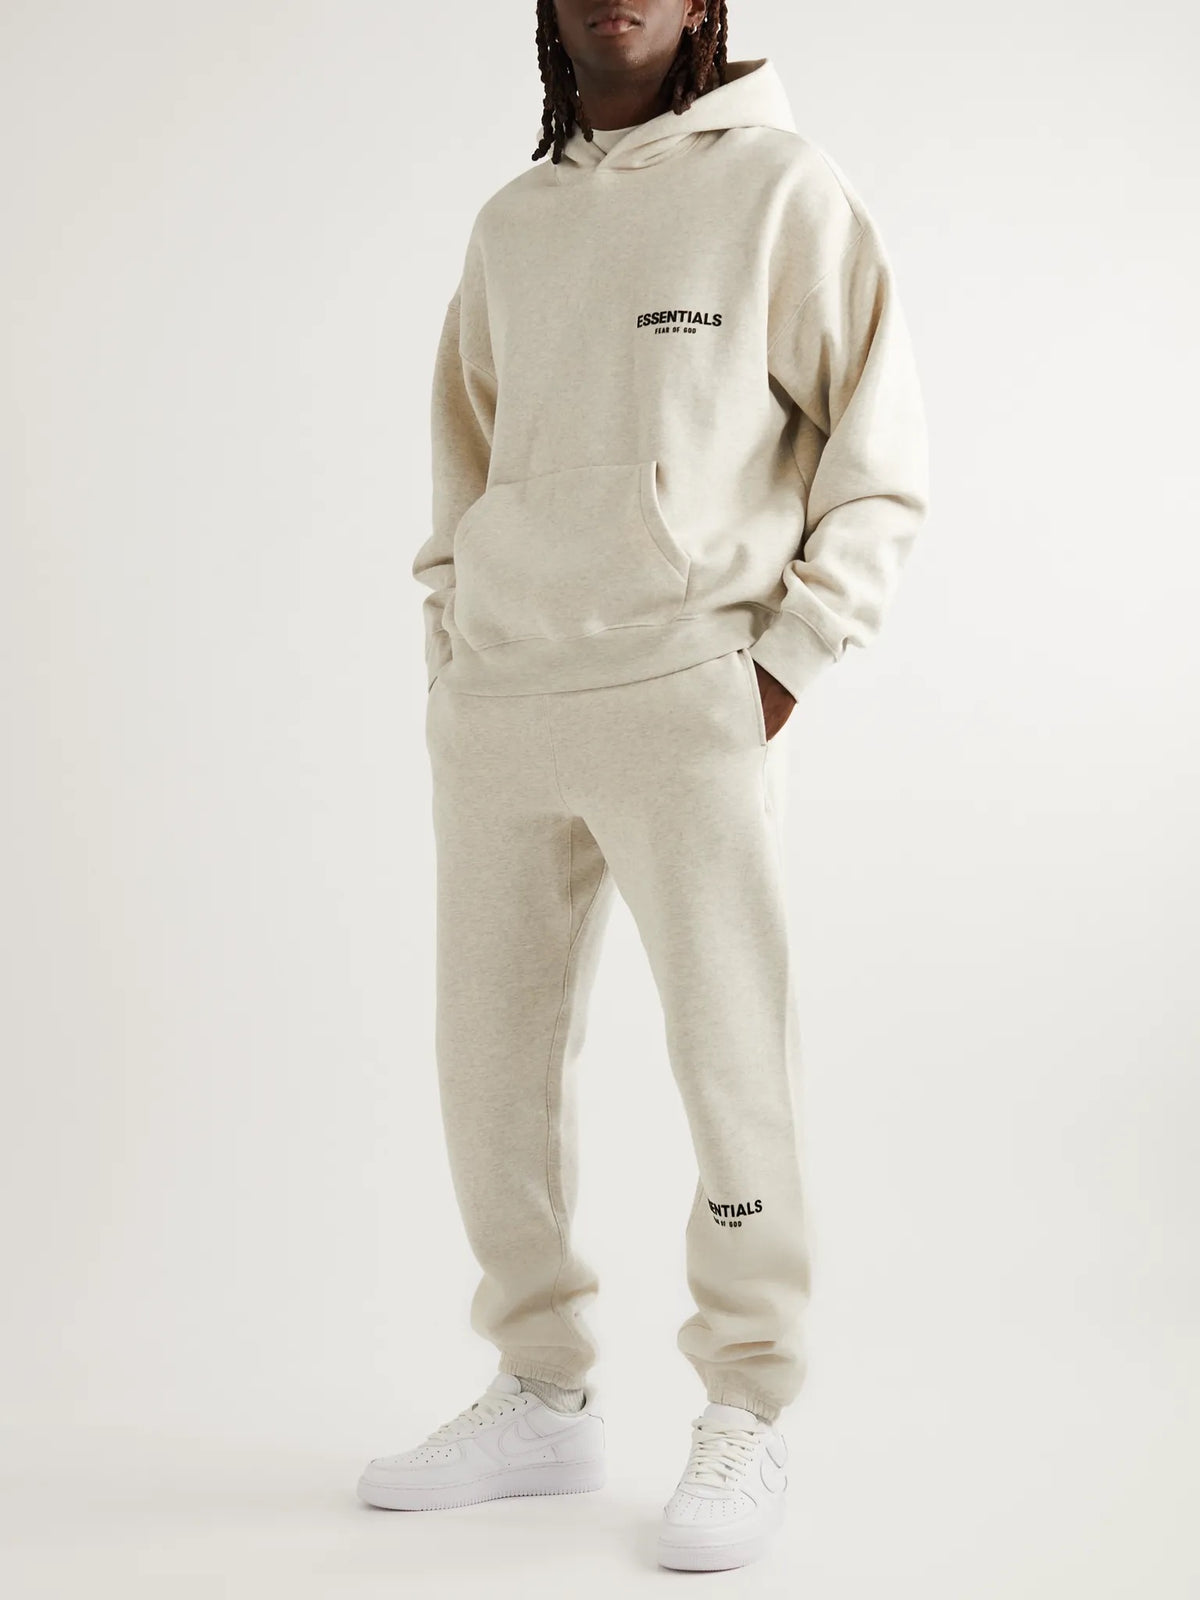 Fear Of God Essentials Tracksuit SS22 “Light Oatmeal”